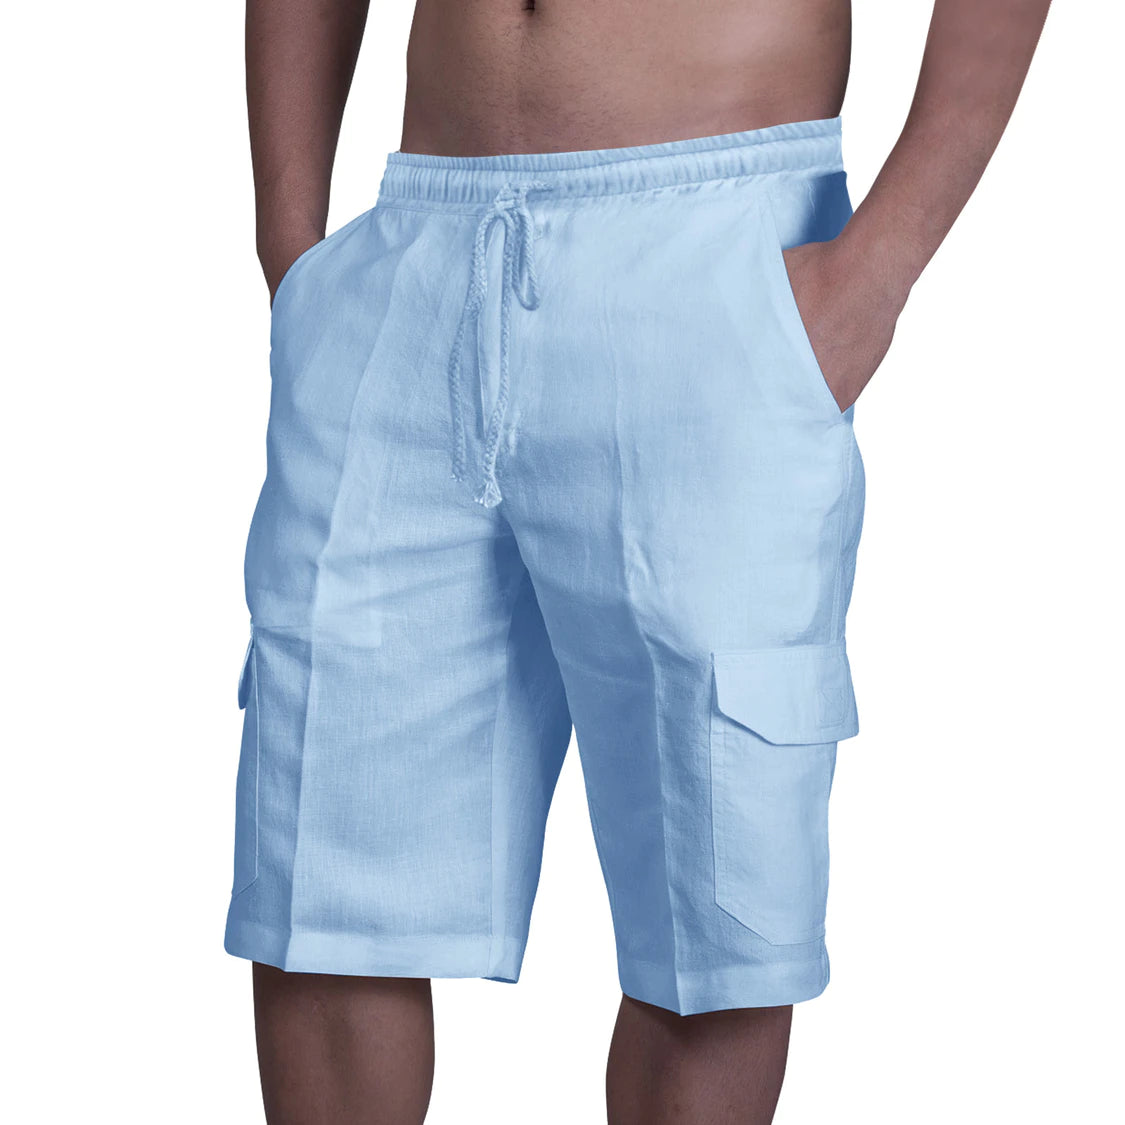 Men's Multiple Bags Tether Beach Shorts Overalls Shorts